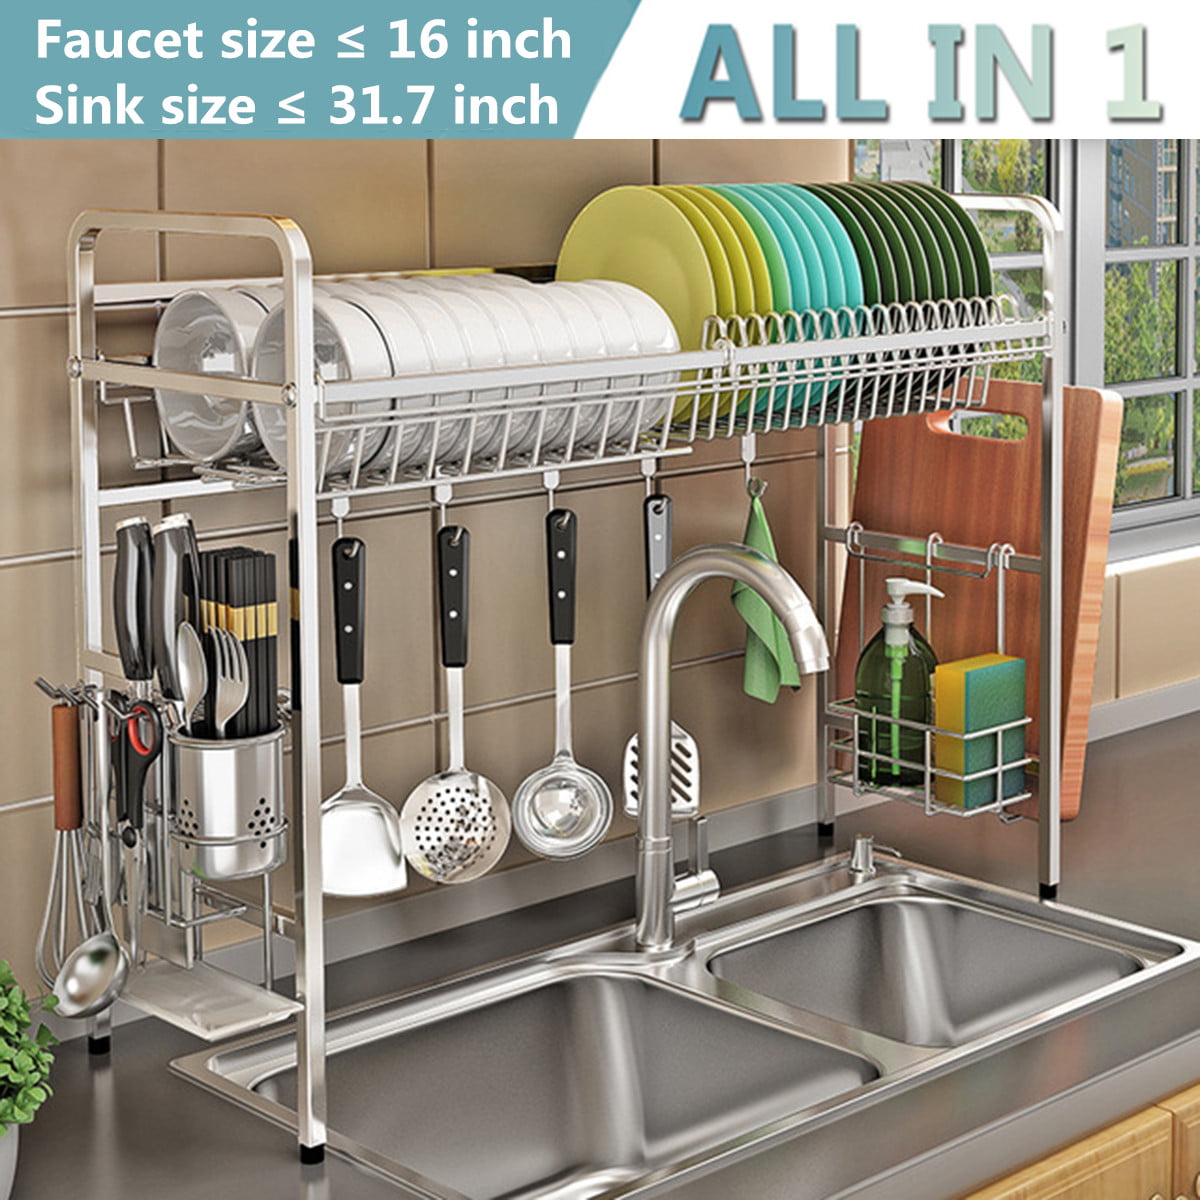 Stainless Steel Dish Drying Rack Over Sink Drainer Shelf 